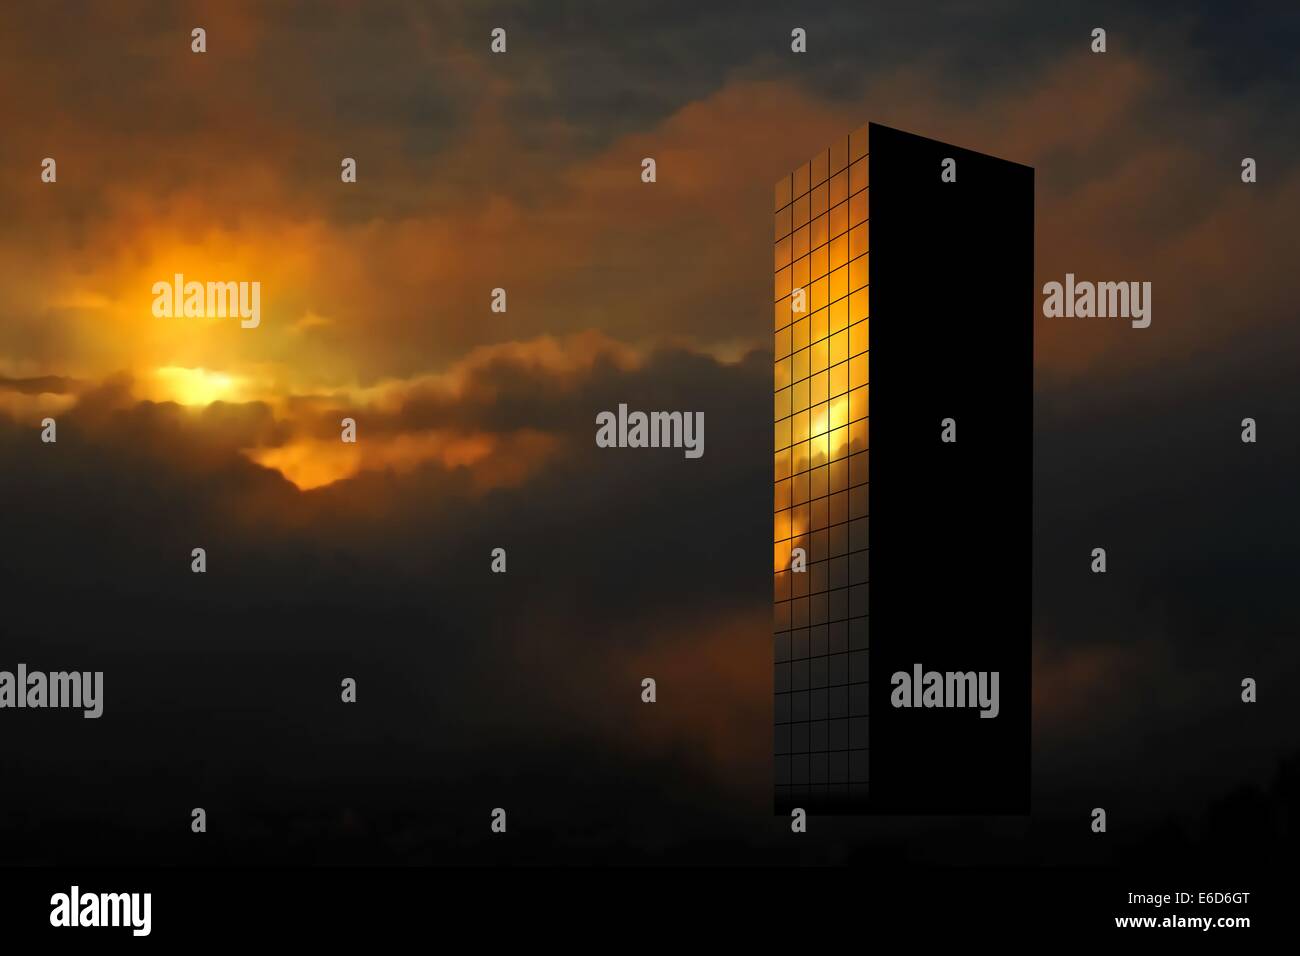 Editable vector illustration of a skyscraper reflecting the rising sun made with gradient meshes Stock Vector